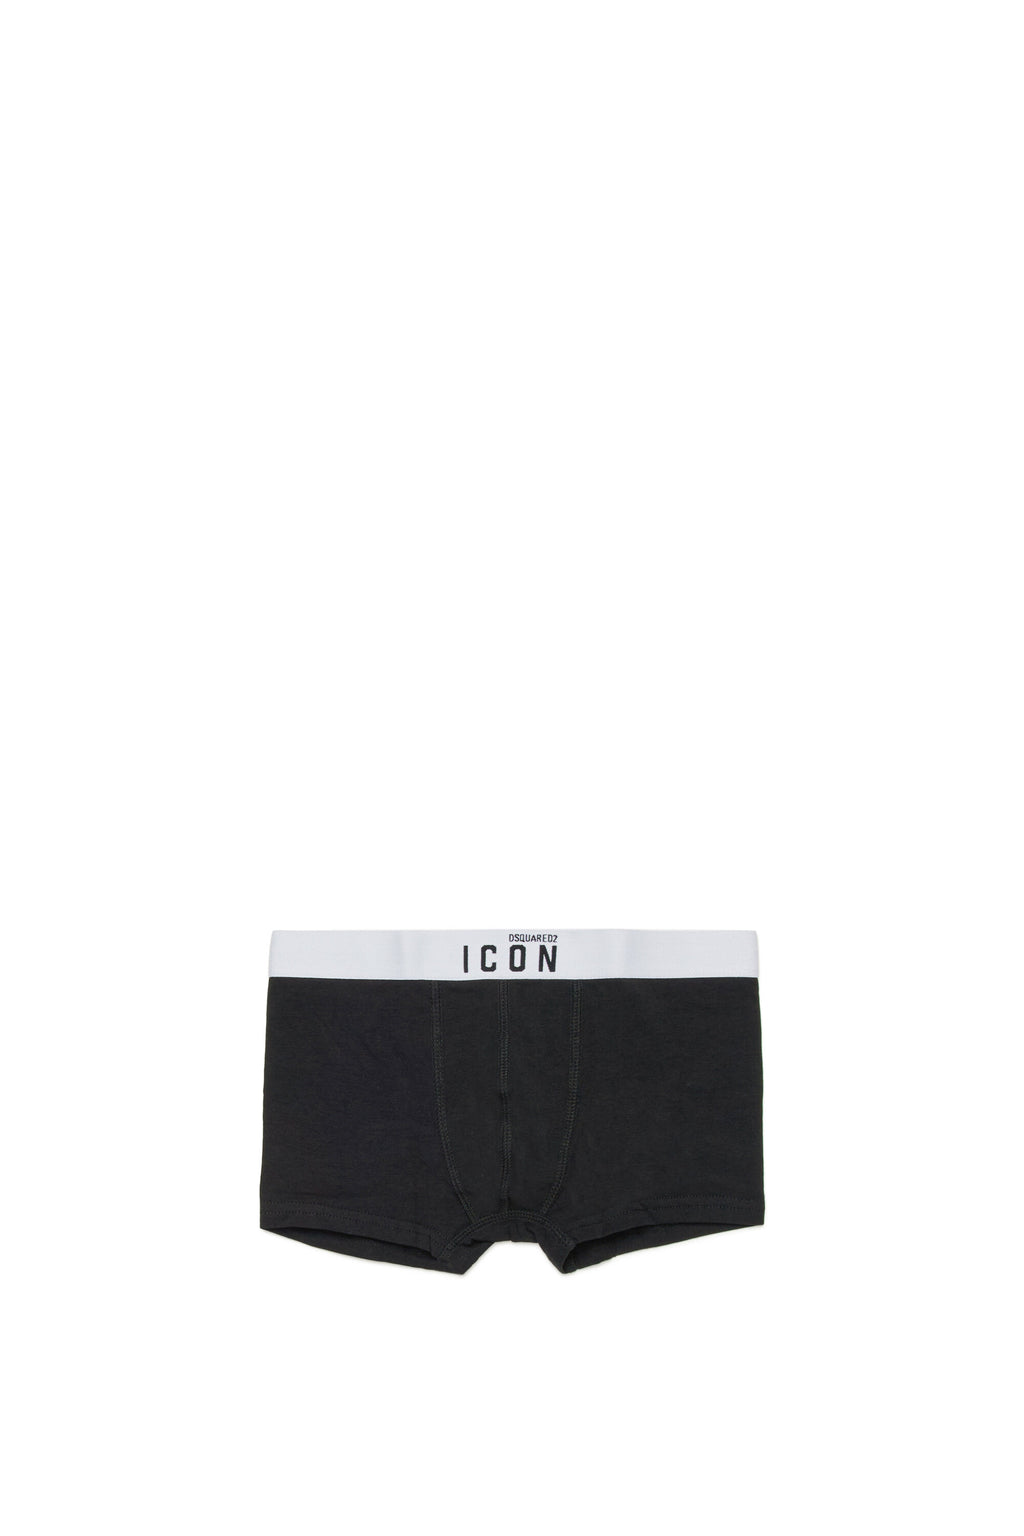 Jersey boxer shorts branded with ICON logo